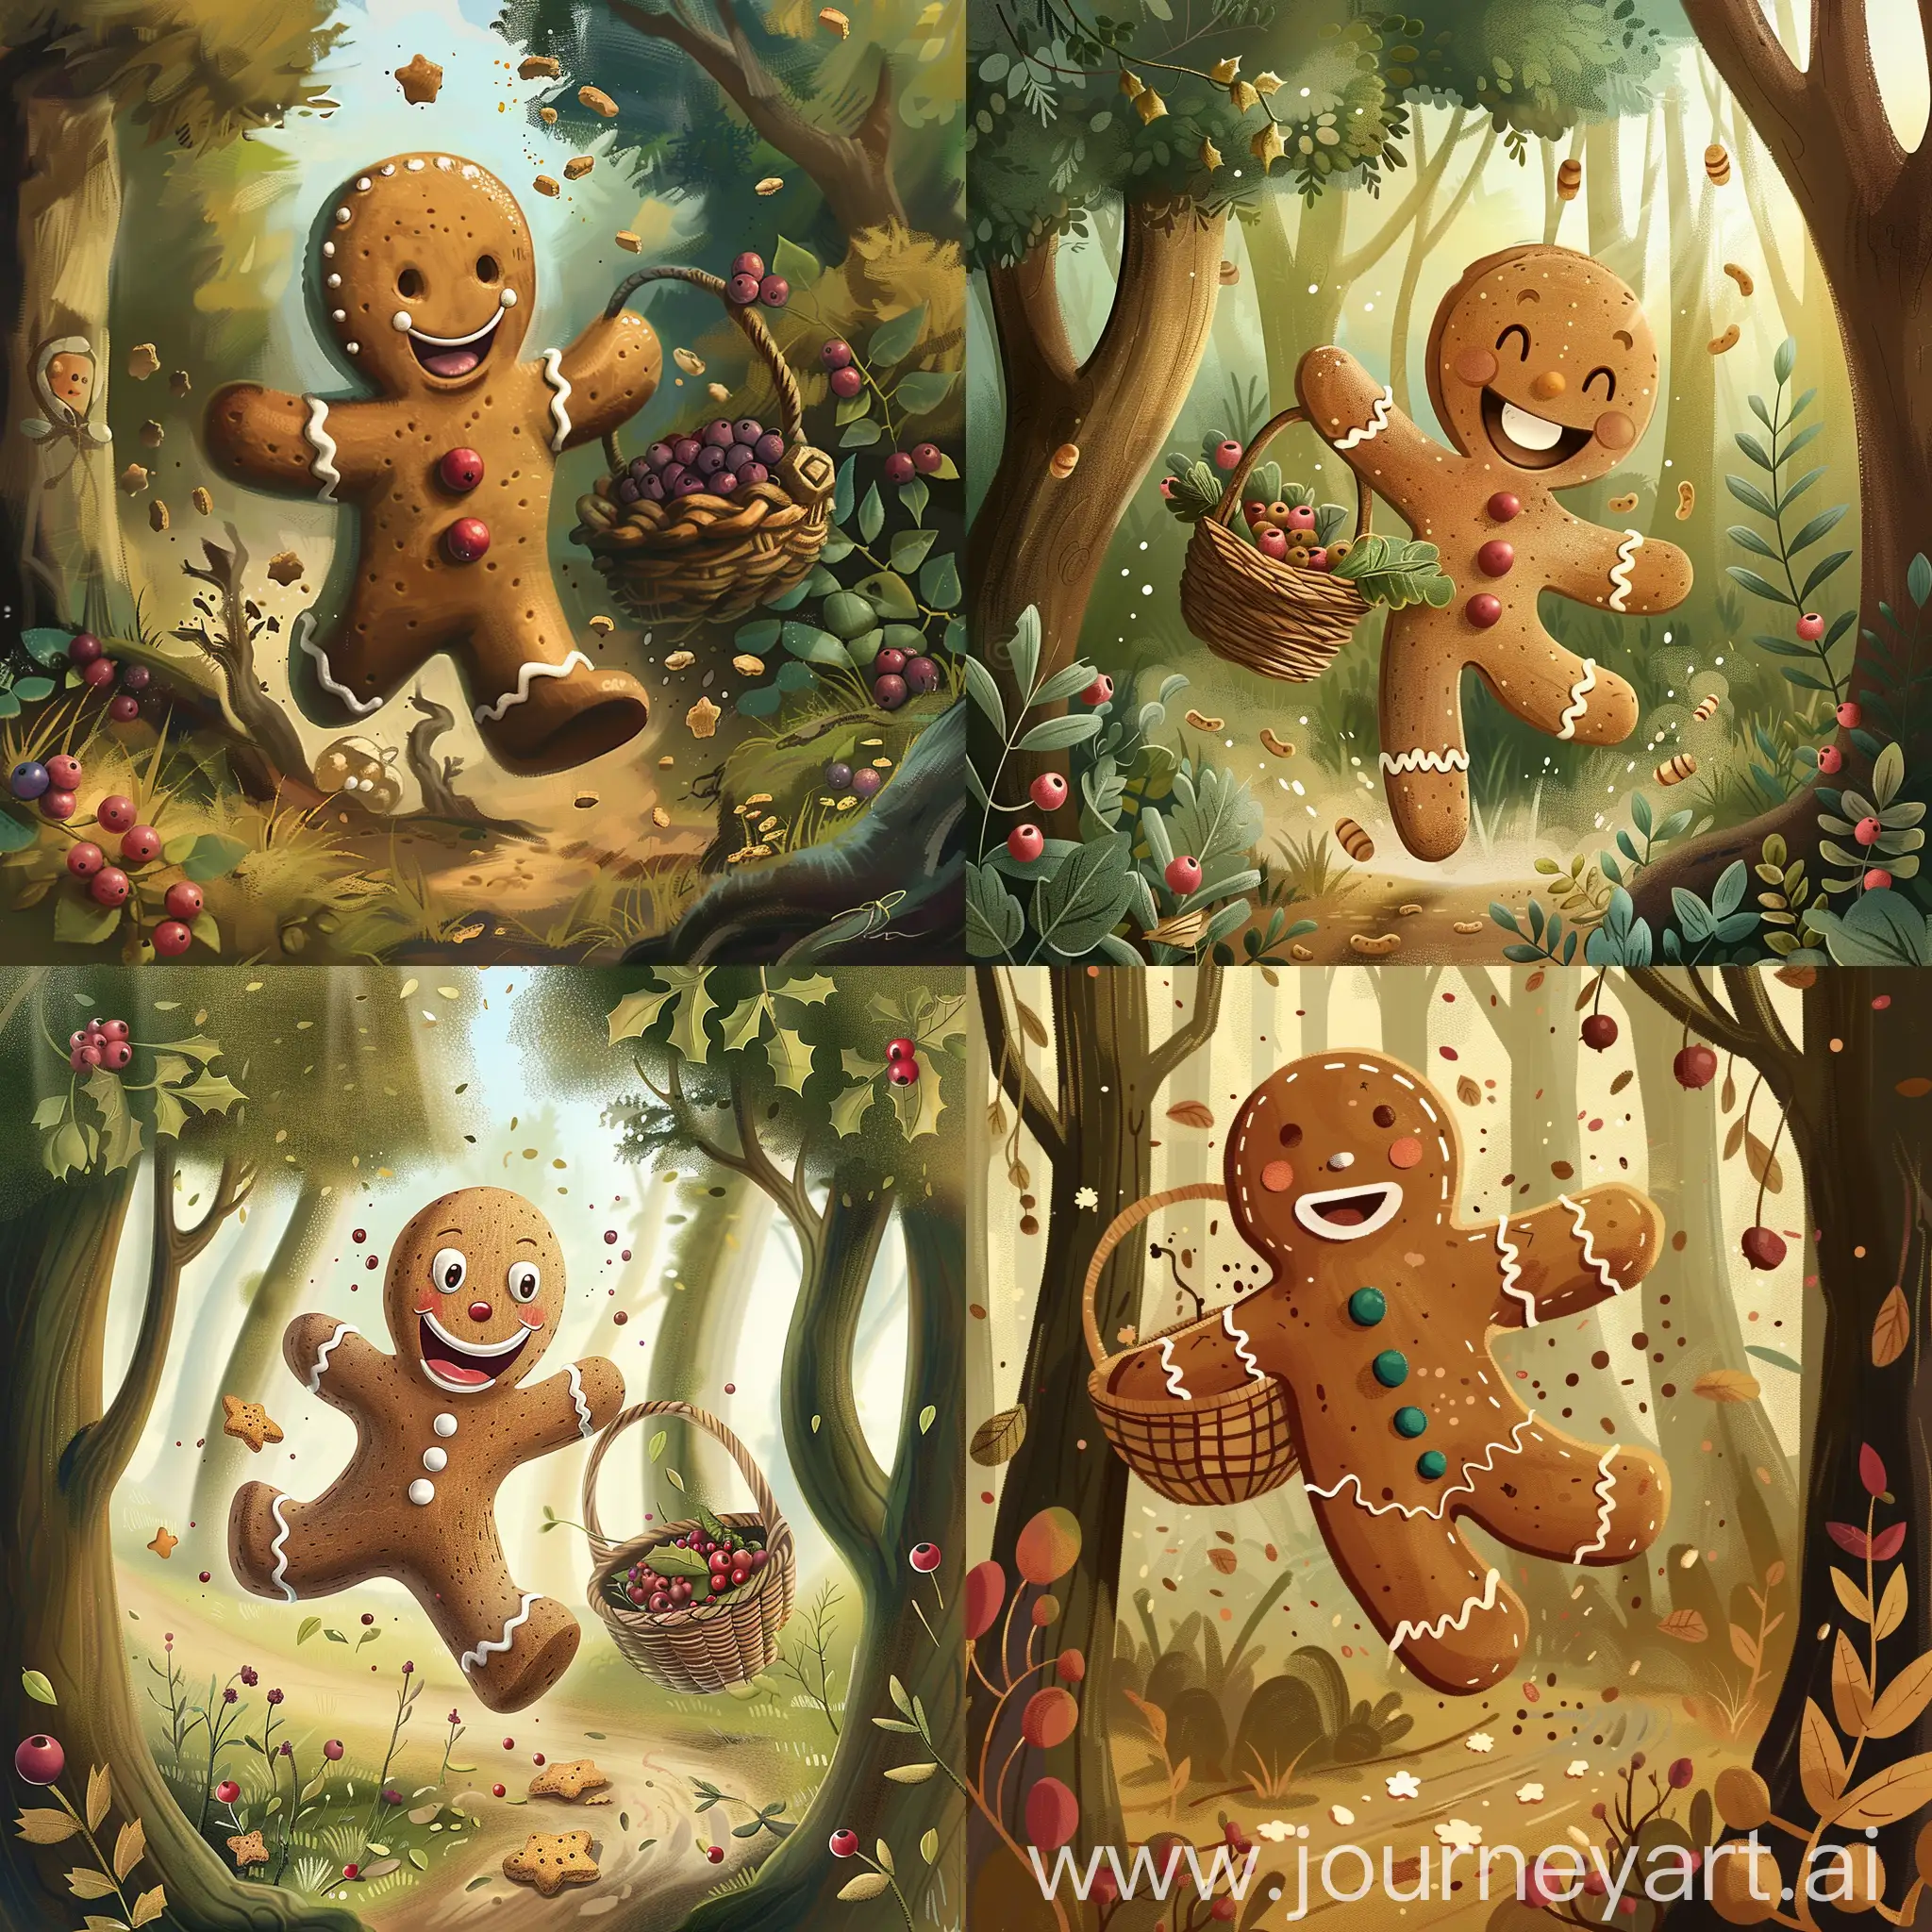 A whimsical illustration of a gingerbread man (kolobok) smiling.  He’s running through a forest with a basket of berries and a trail of crumbs behind him. Style: cartoon. children’s book illustration.